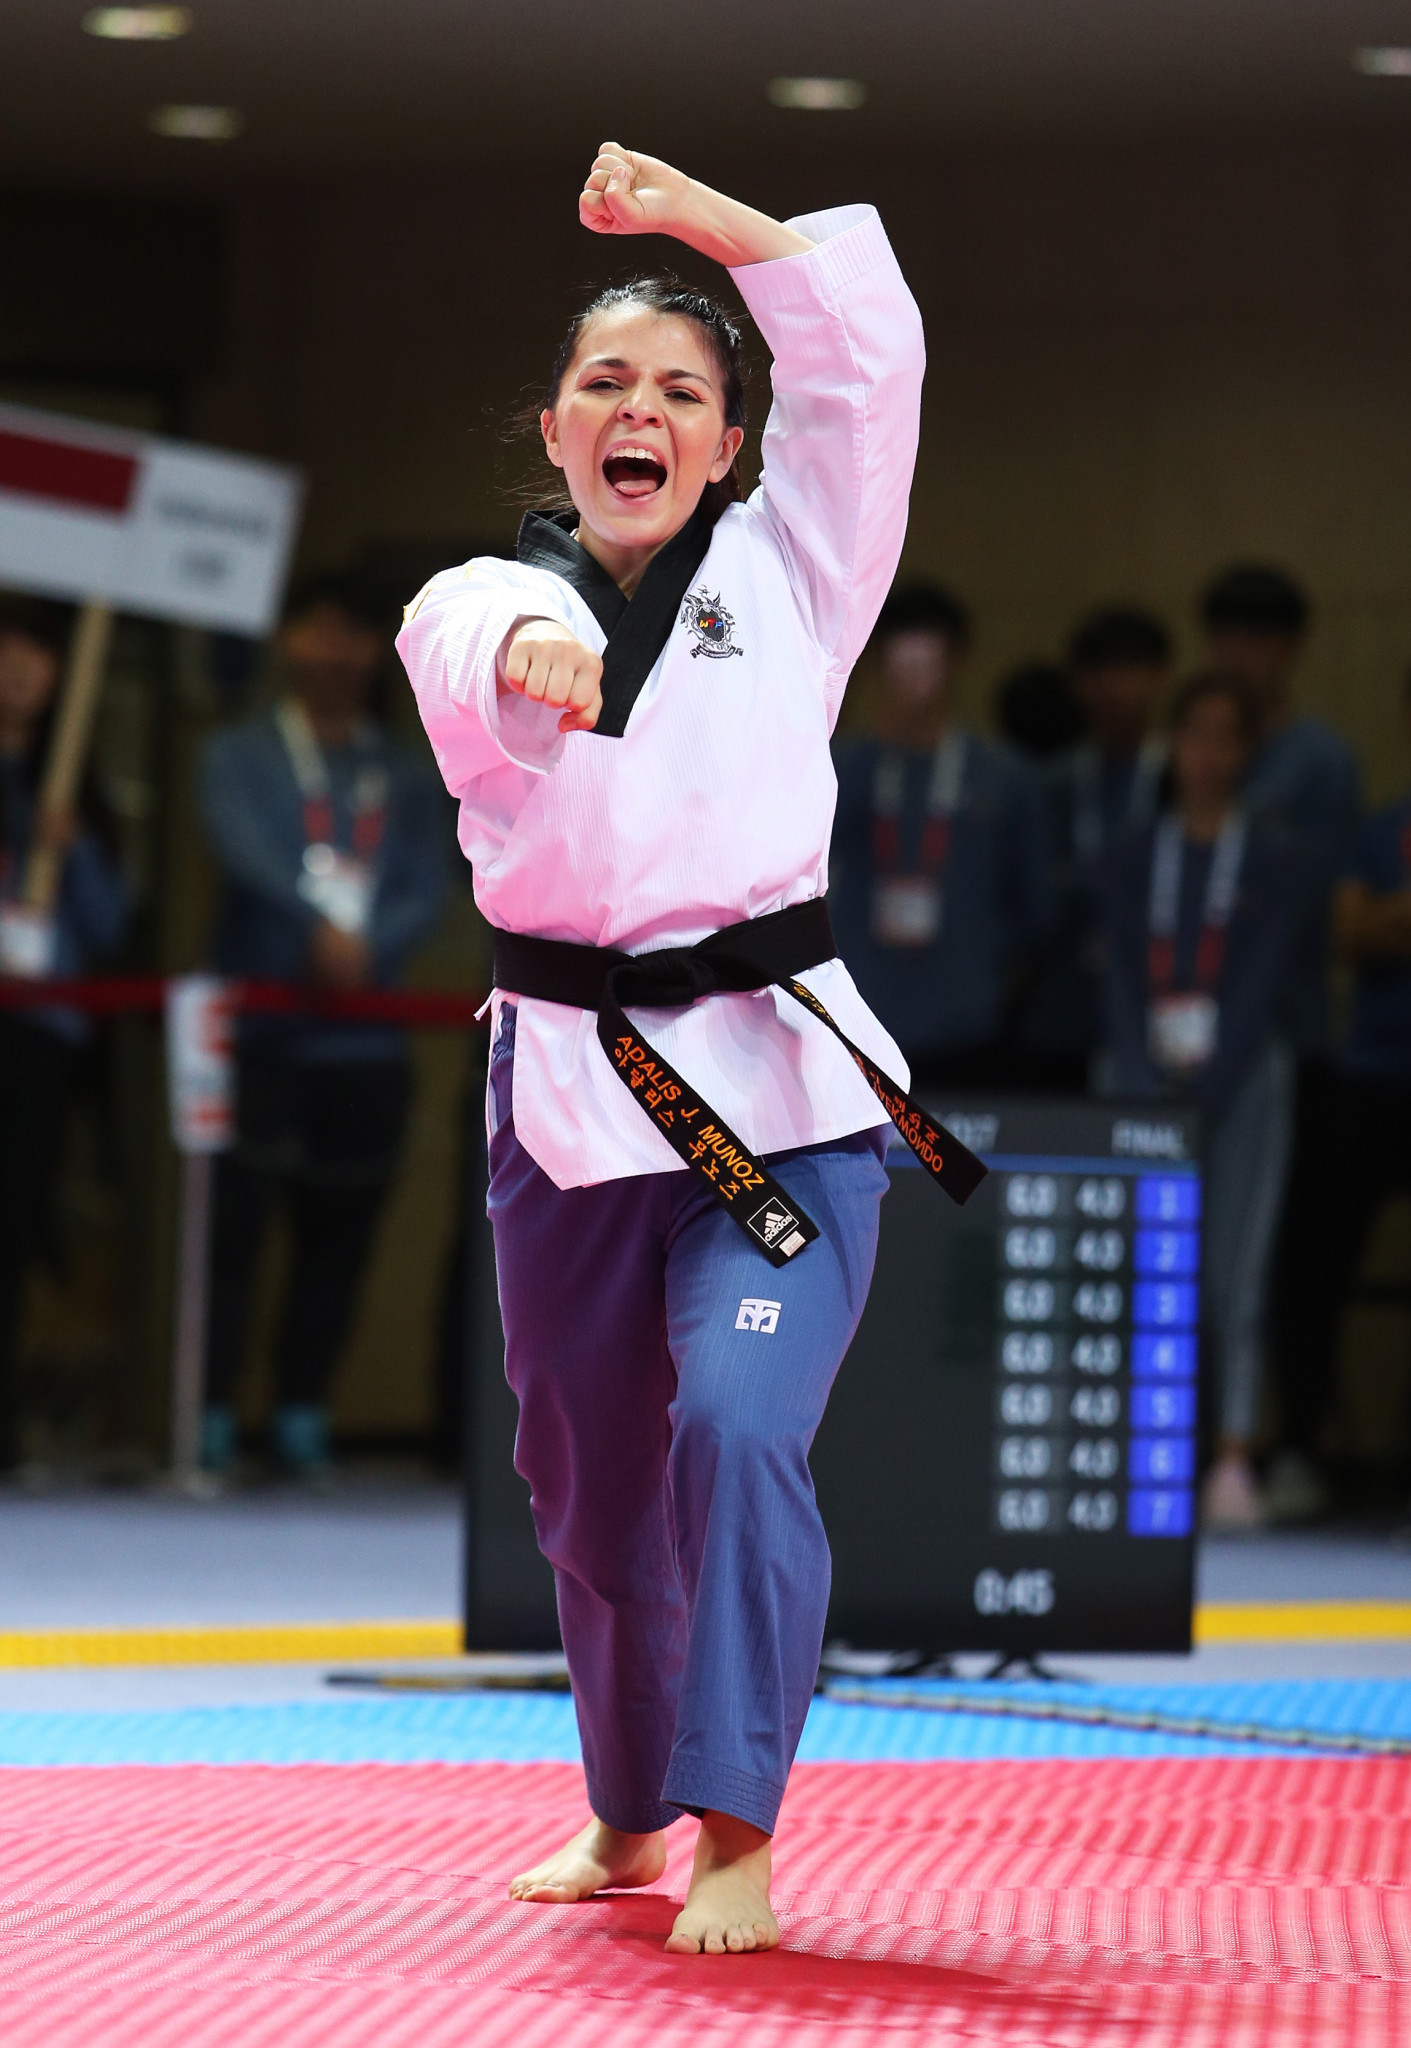 Elite and family categories will be held at the virtual event ©World Taekwondo